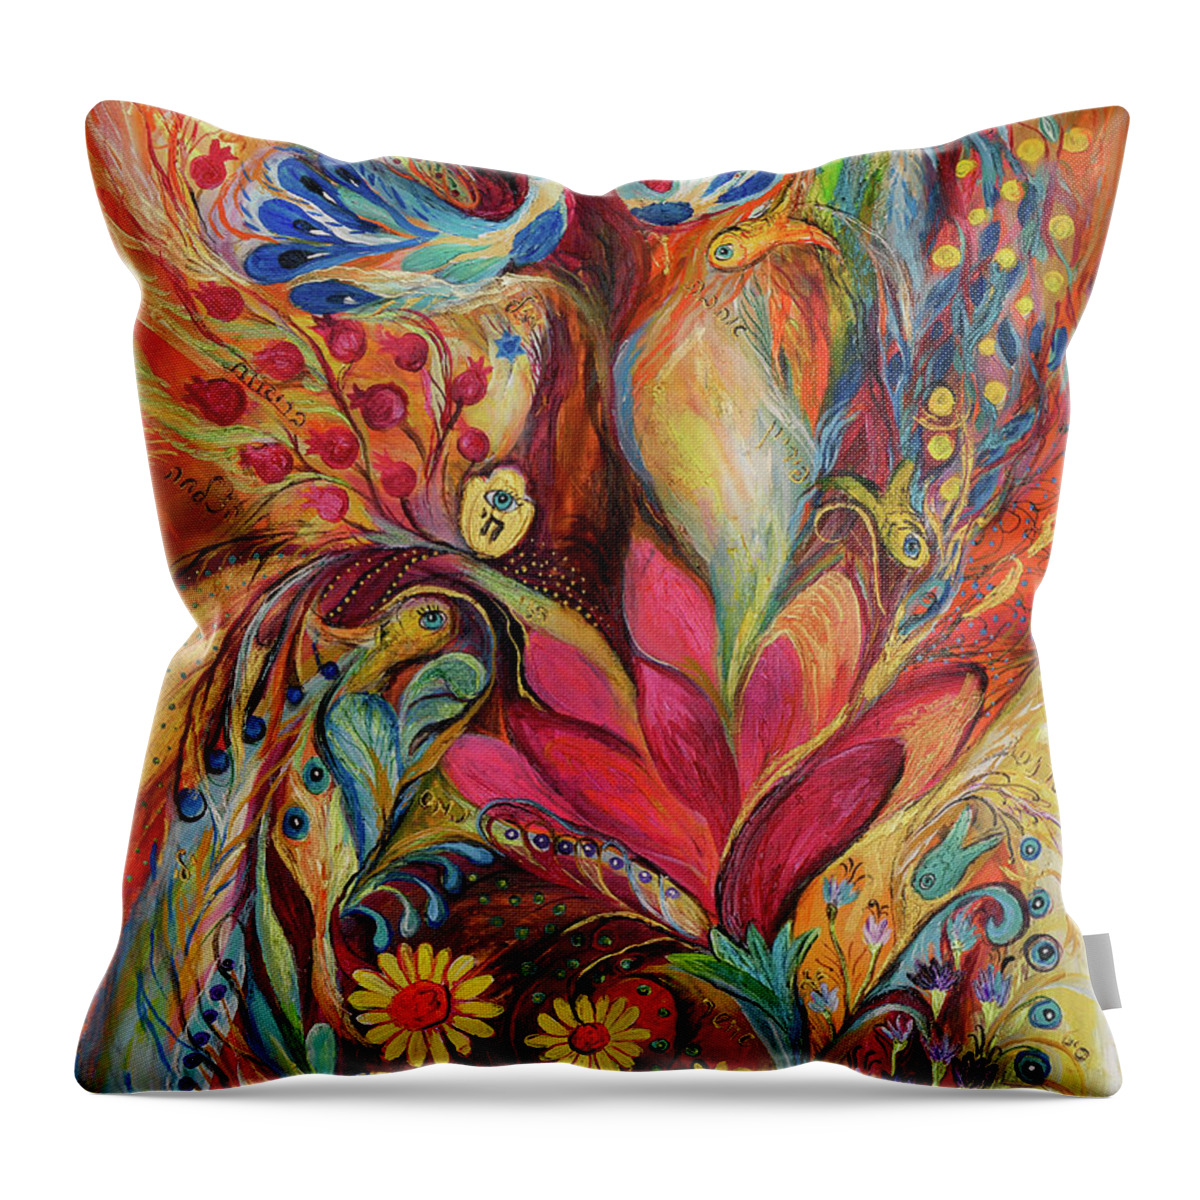 Original Throw Pillow featuring the painting The Tree of Life #1 by Elena Kotliarker